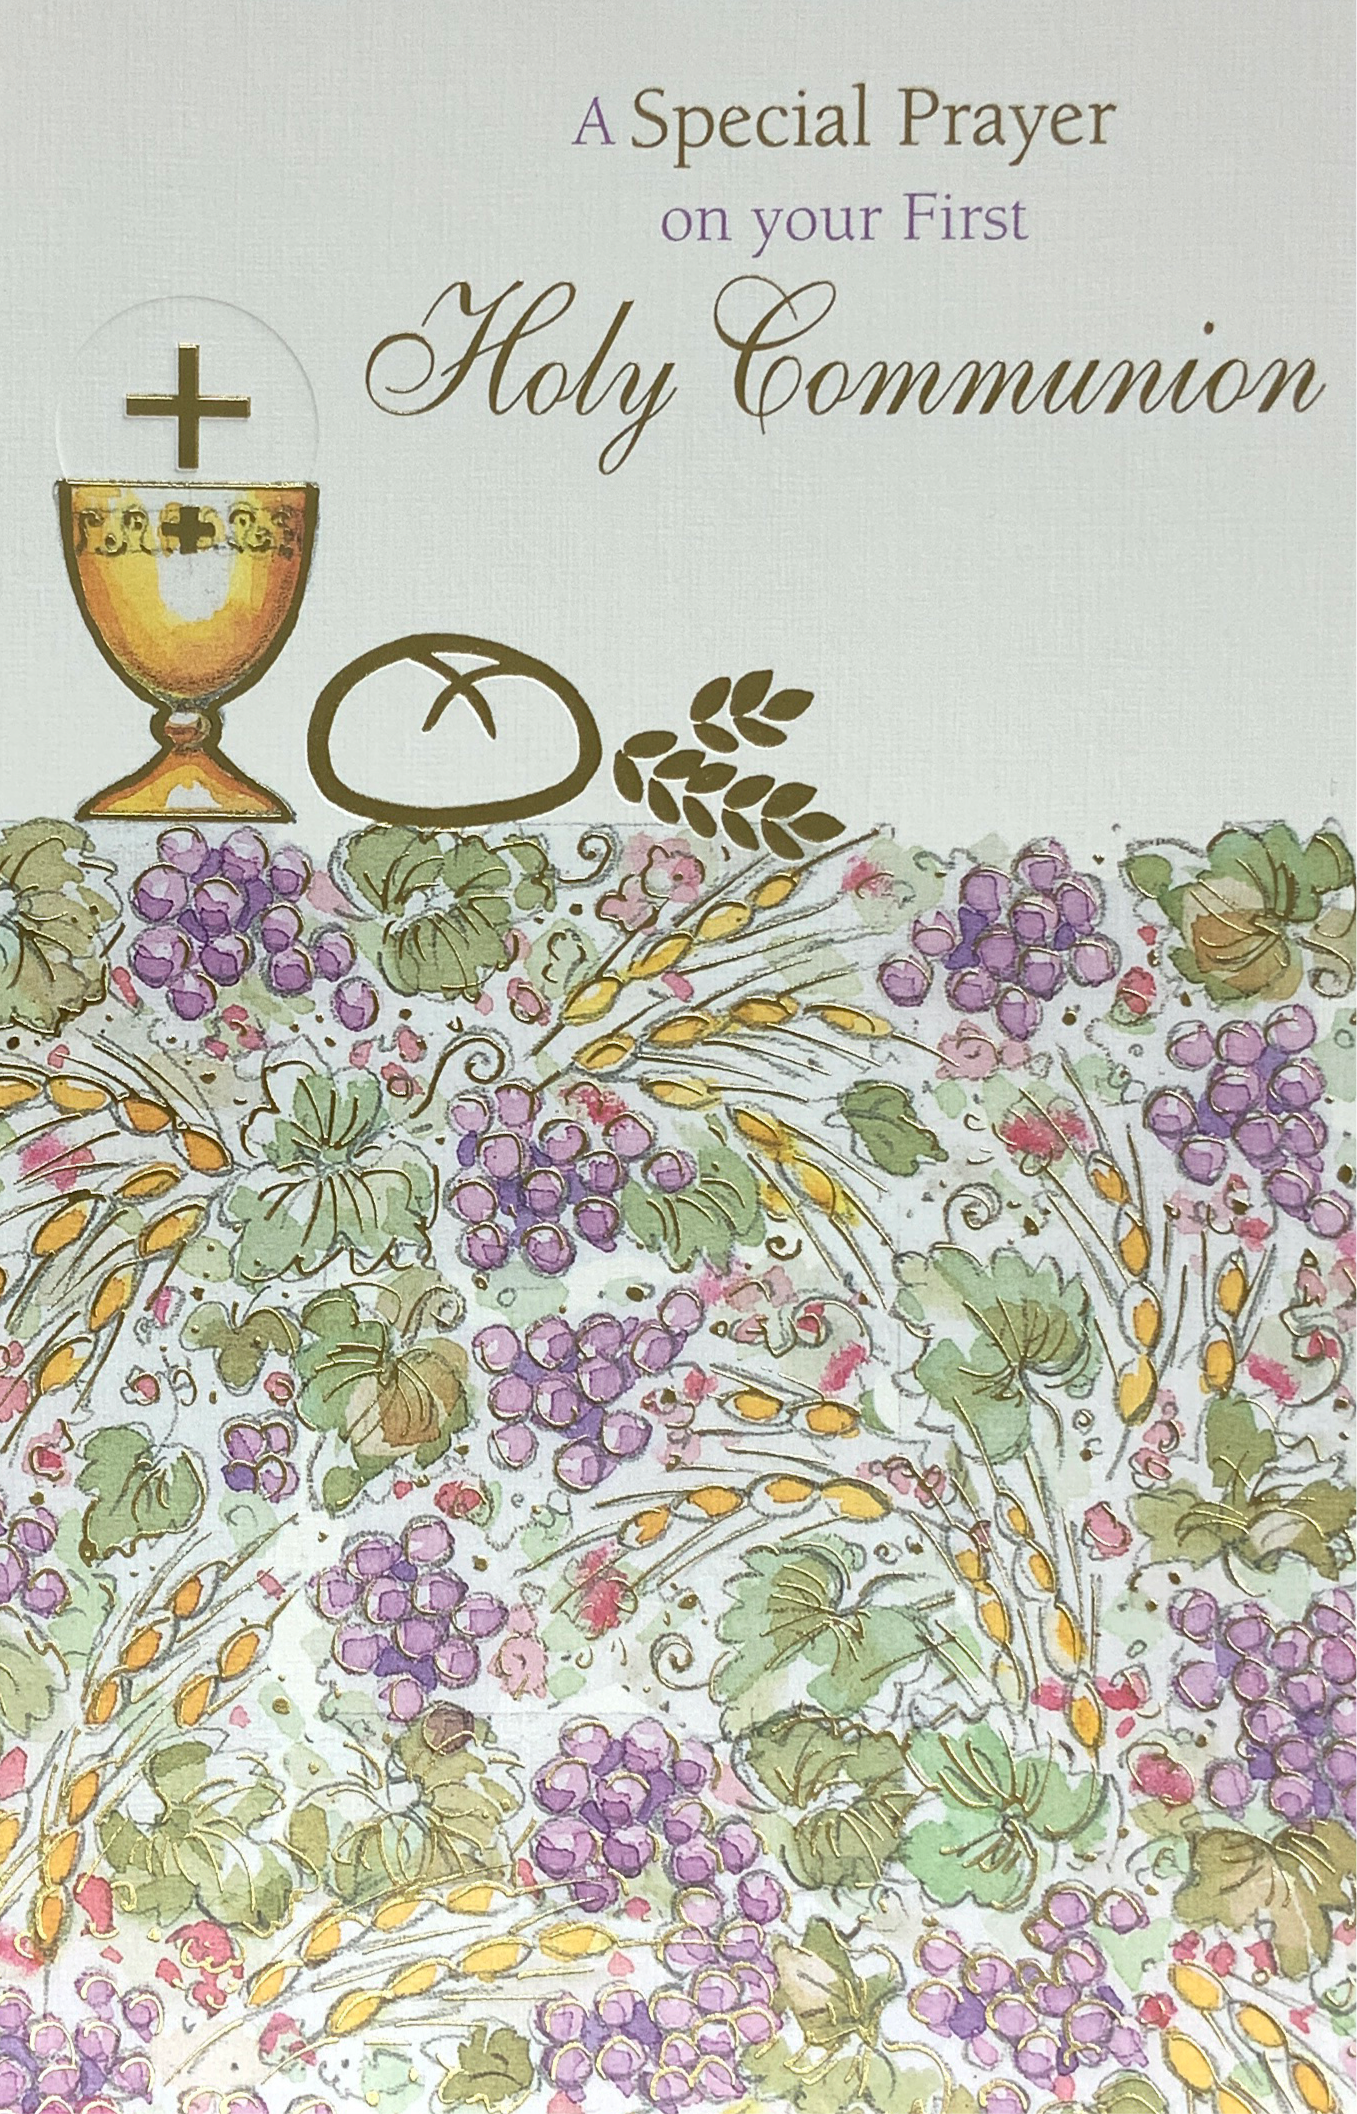 Communion Card - A Special Prayer (Traditional)